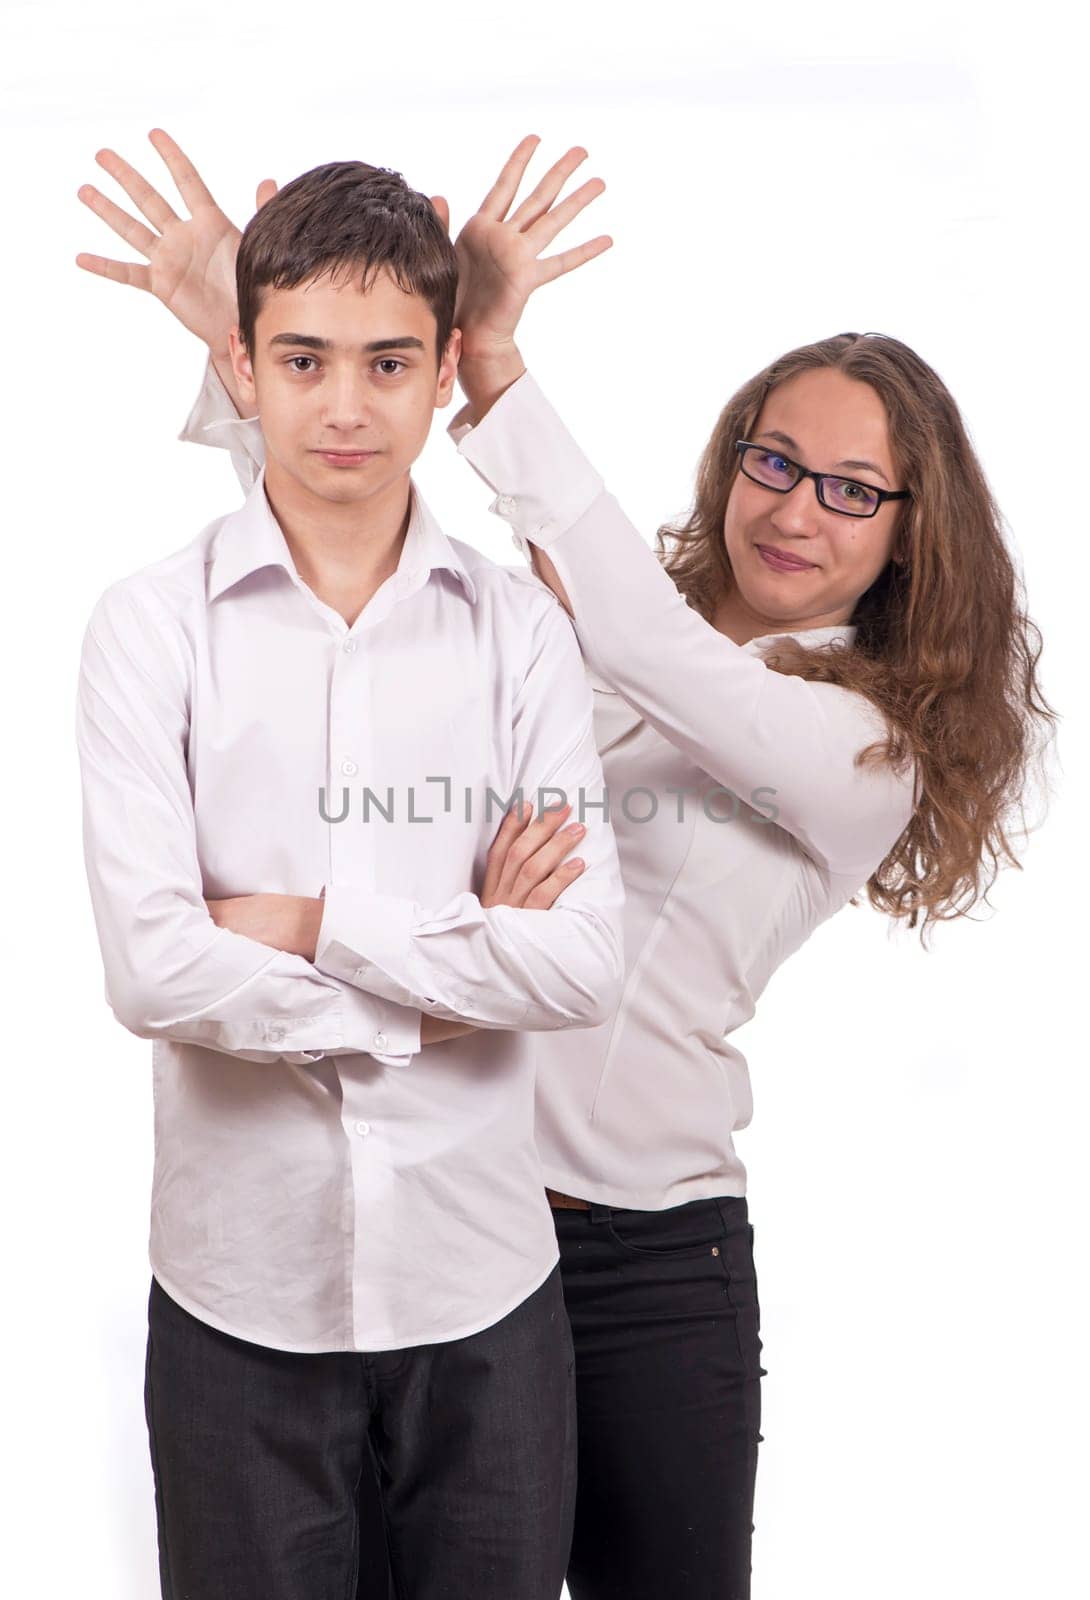 schoolchildren are joking building horns. Portrait of cute schoolchildren. A girl and a guy in school clothes are having fun and joking, playing tricks on each other. The girl shows the horns. Studio isolated on white background. by aprilphoto